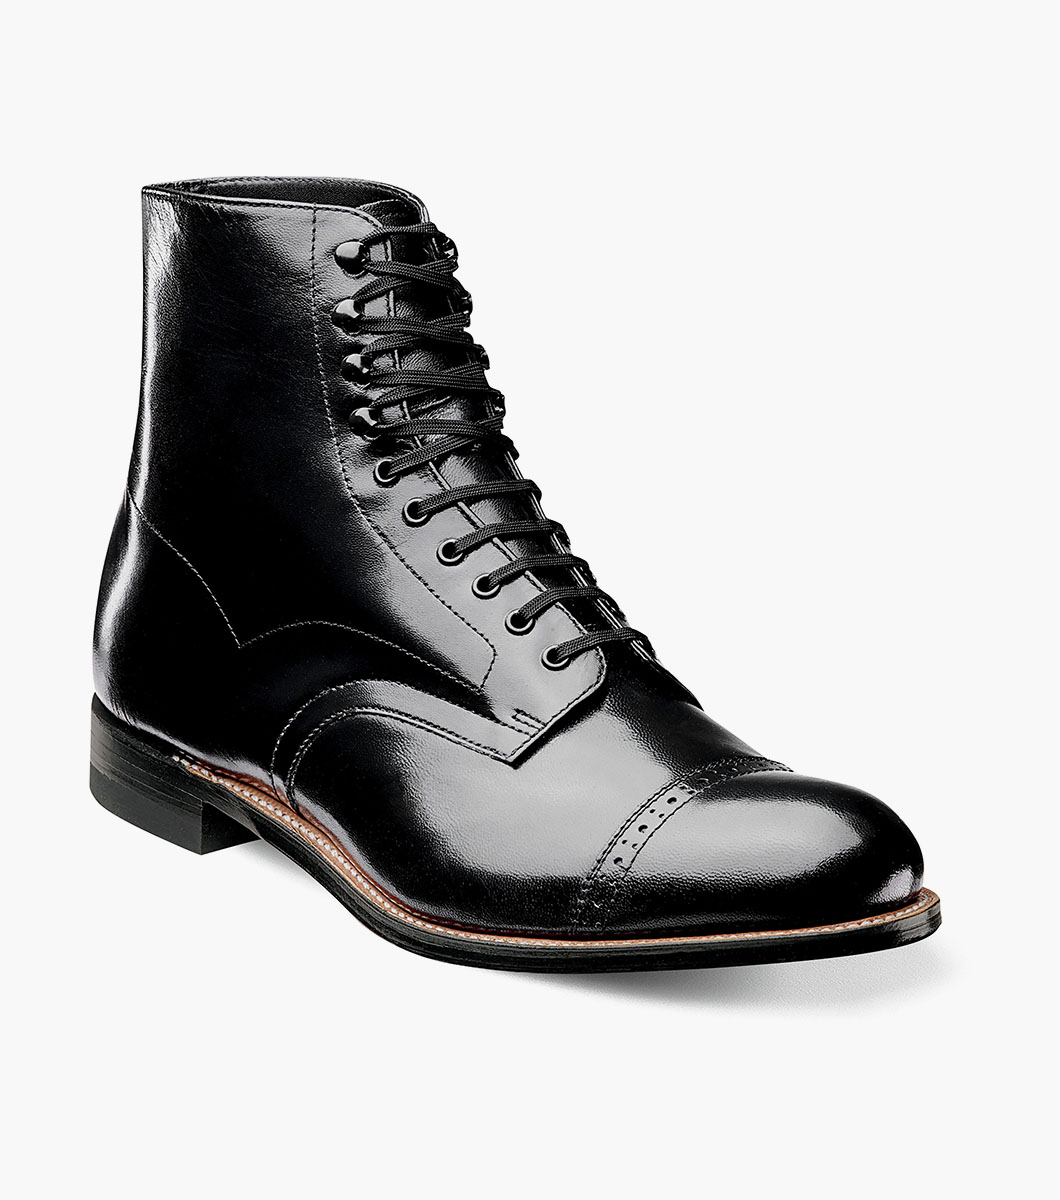 boot dress shoes